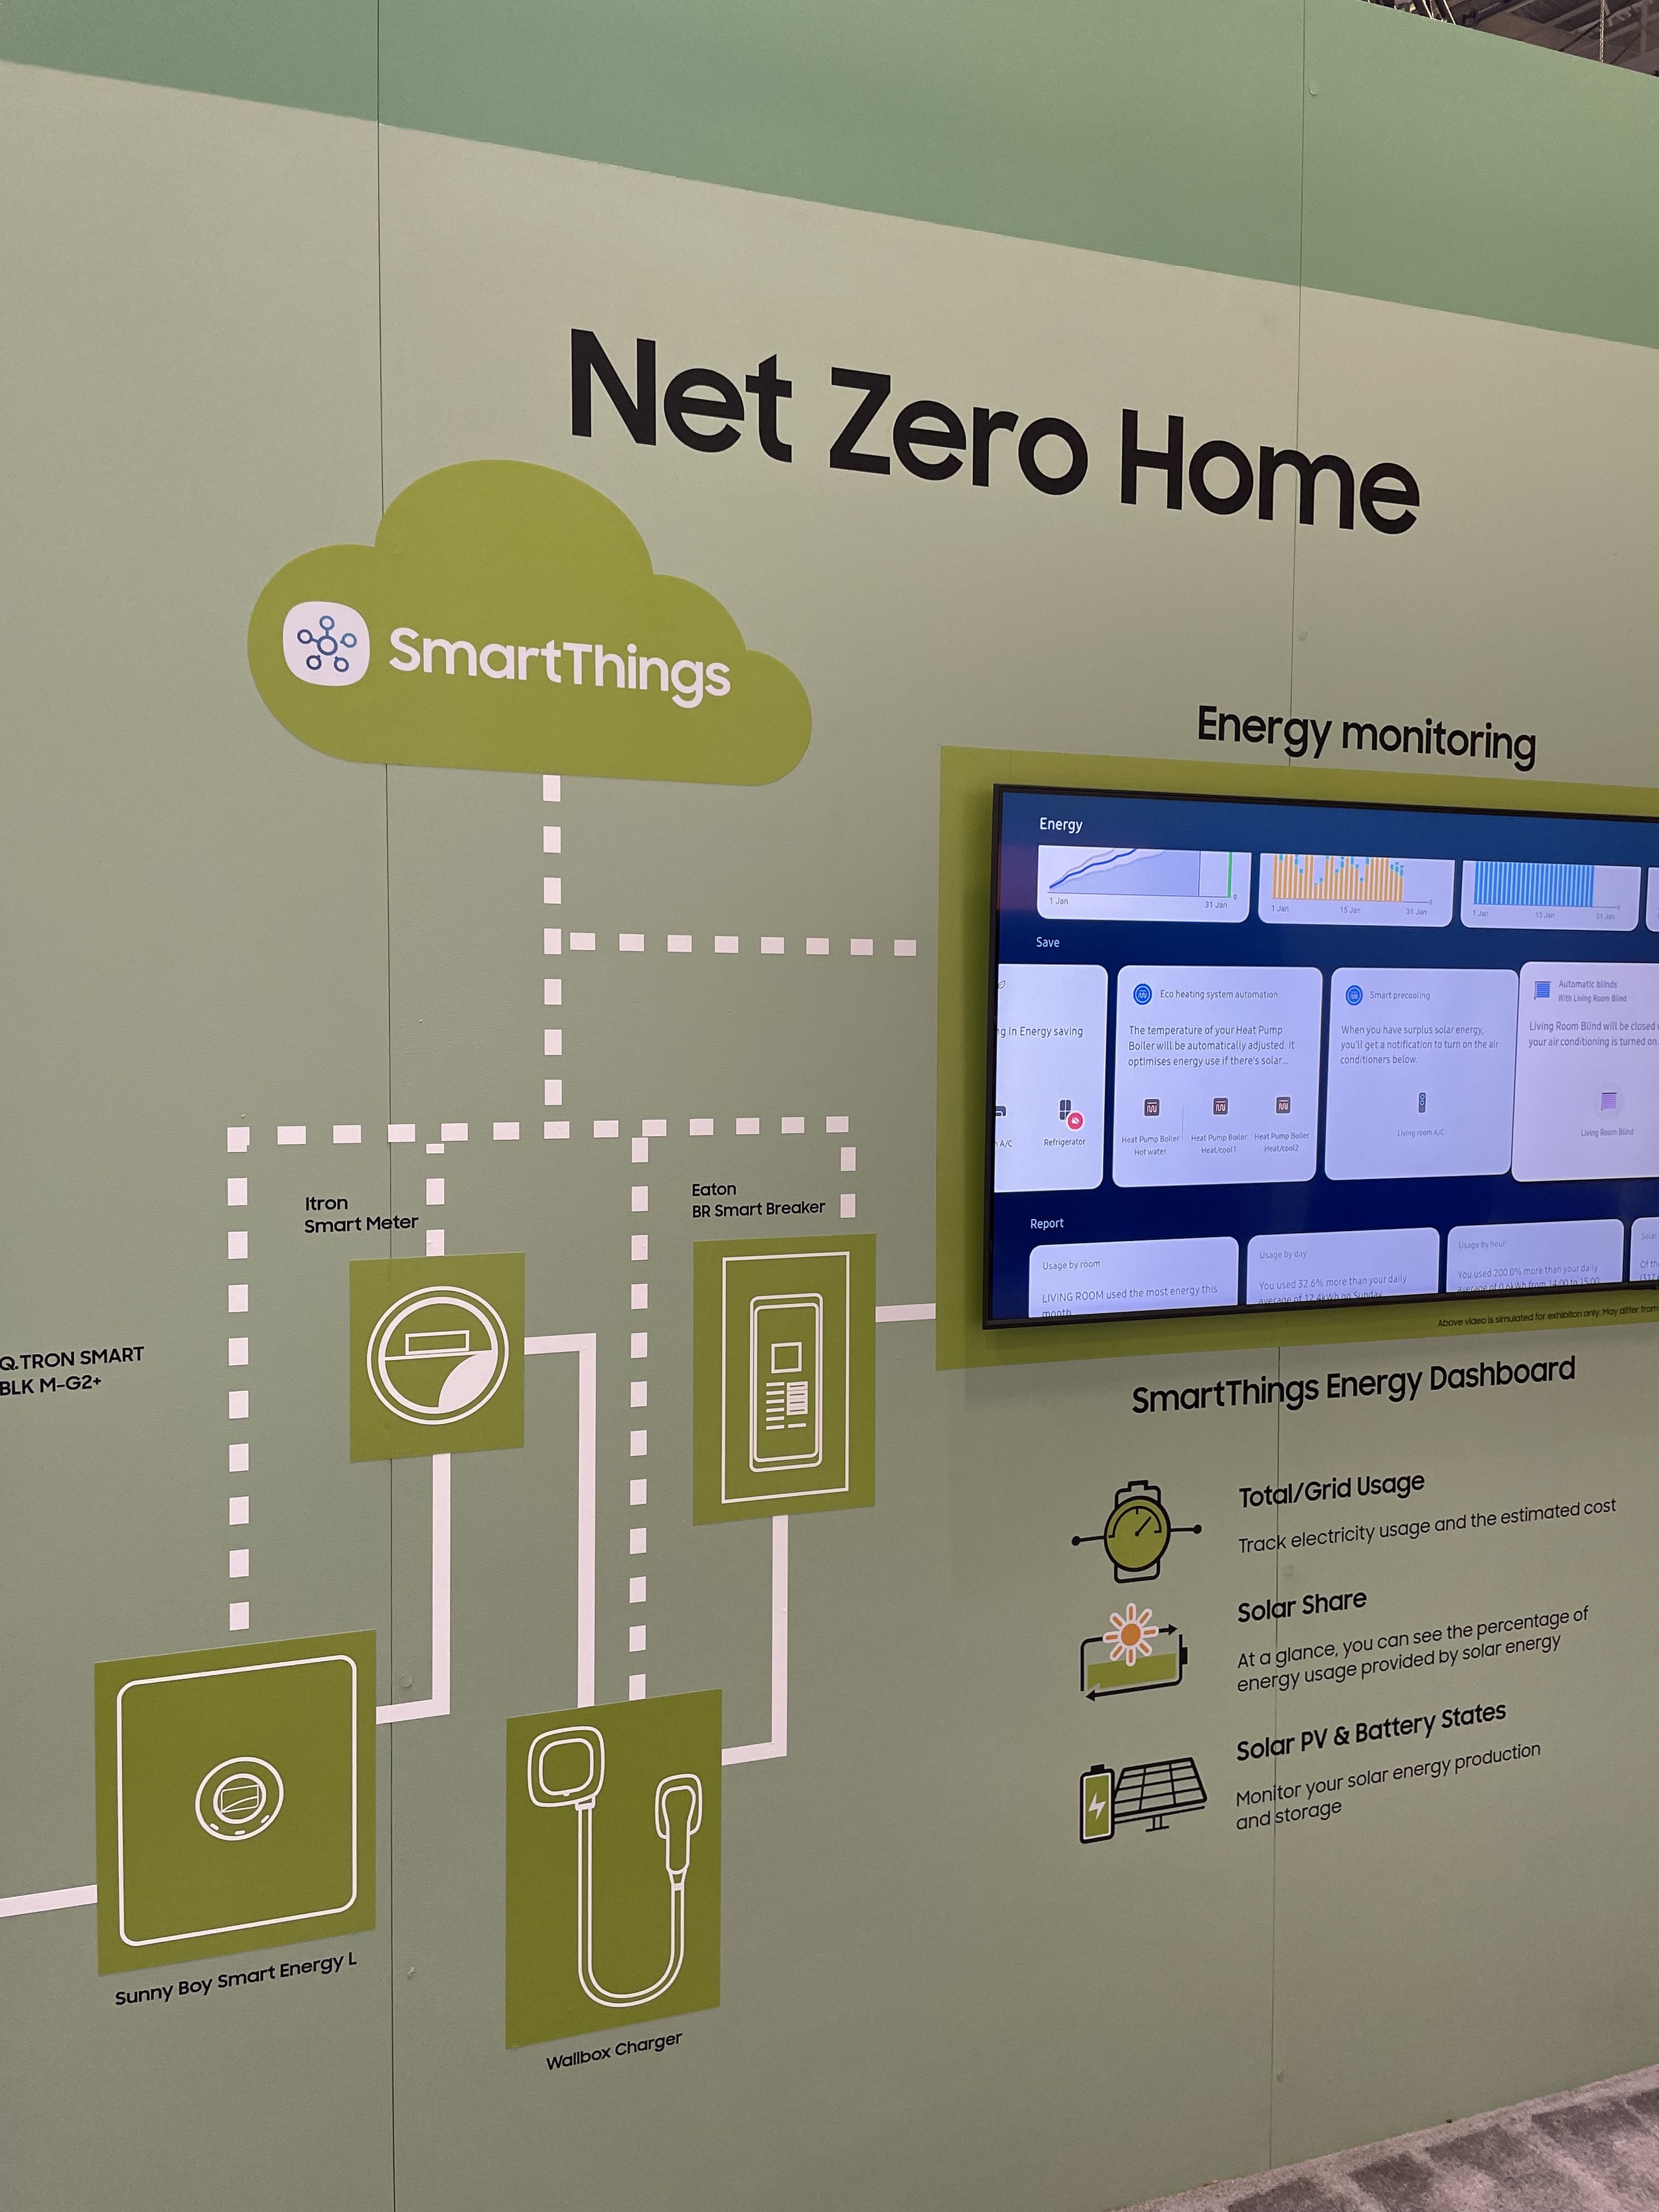 Net Zero Home display at the 2023 NRF Big Show.